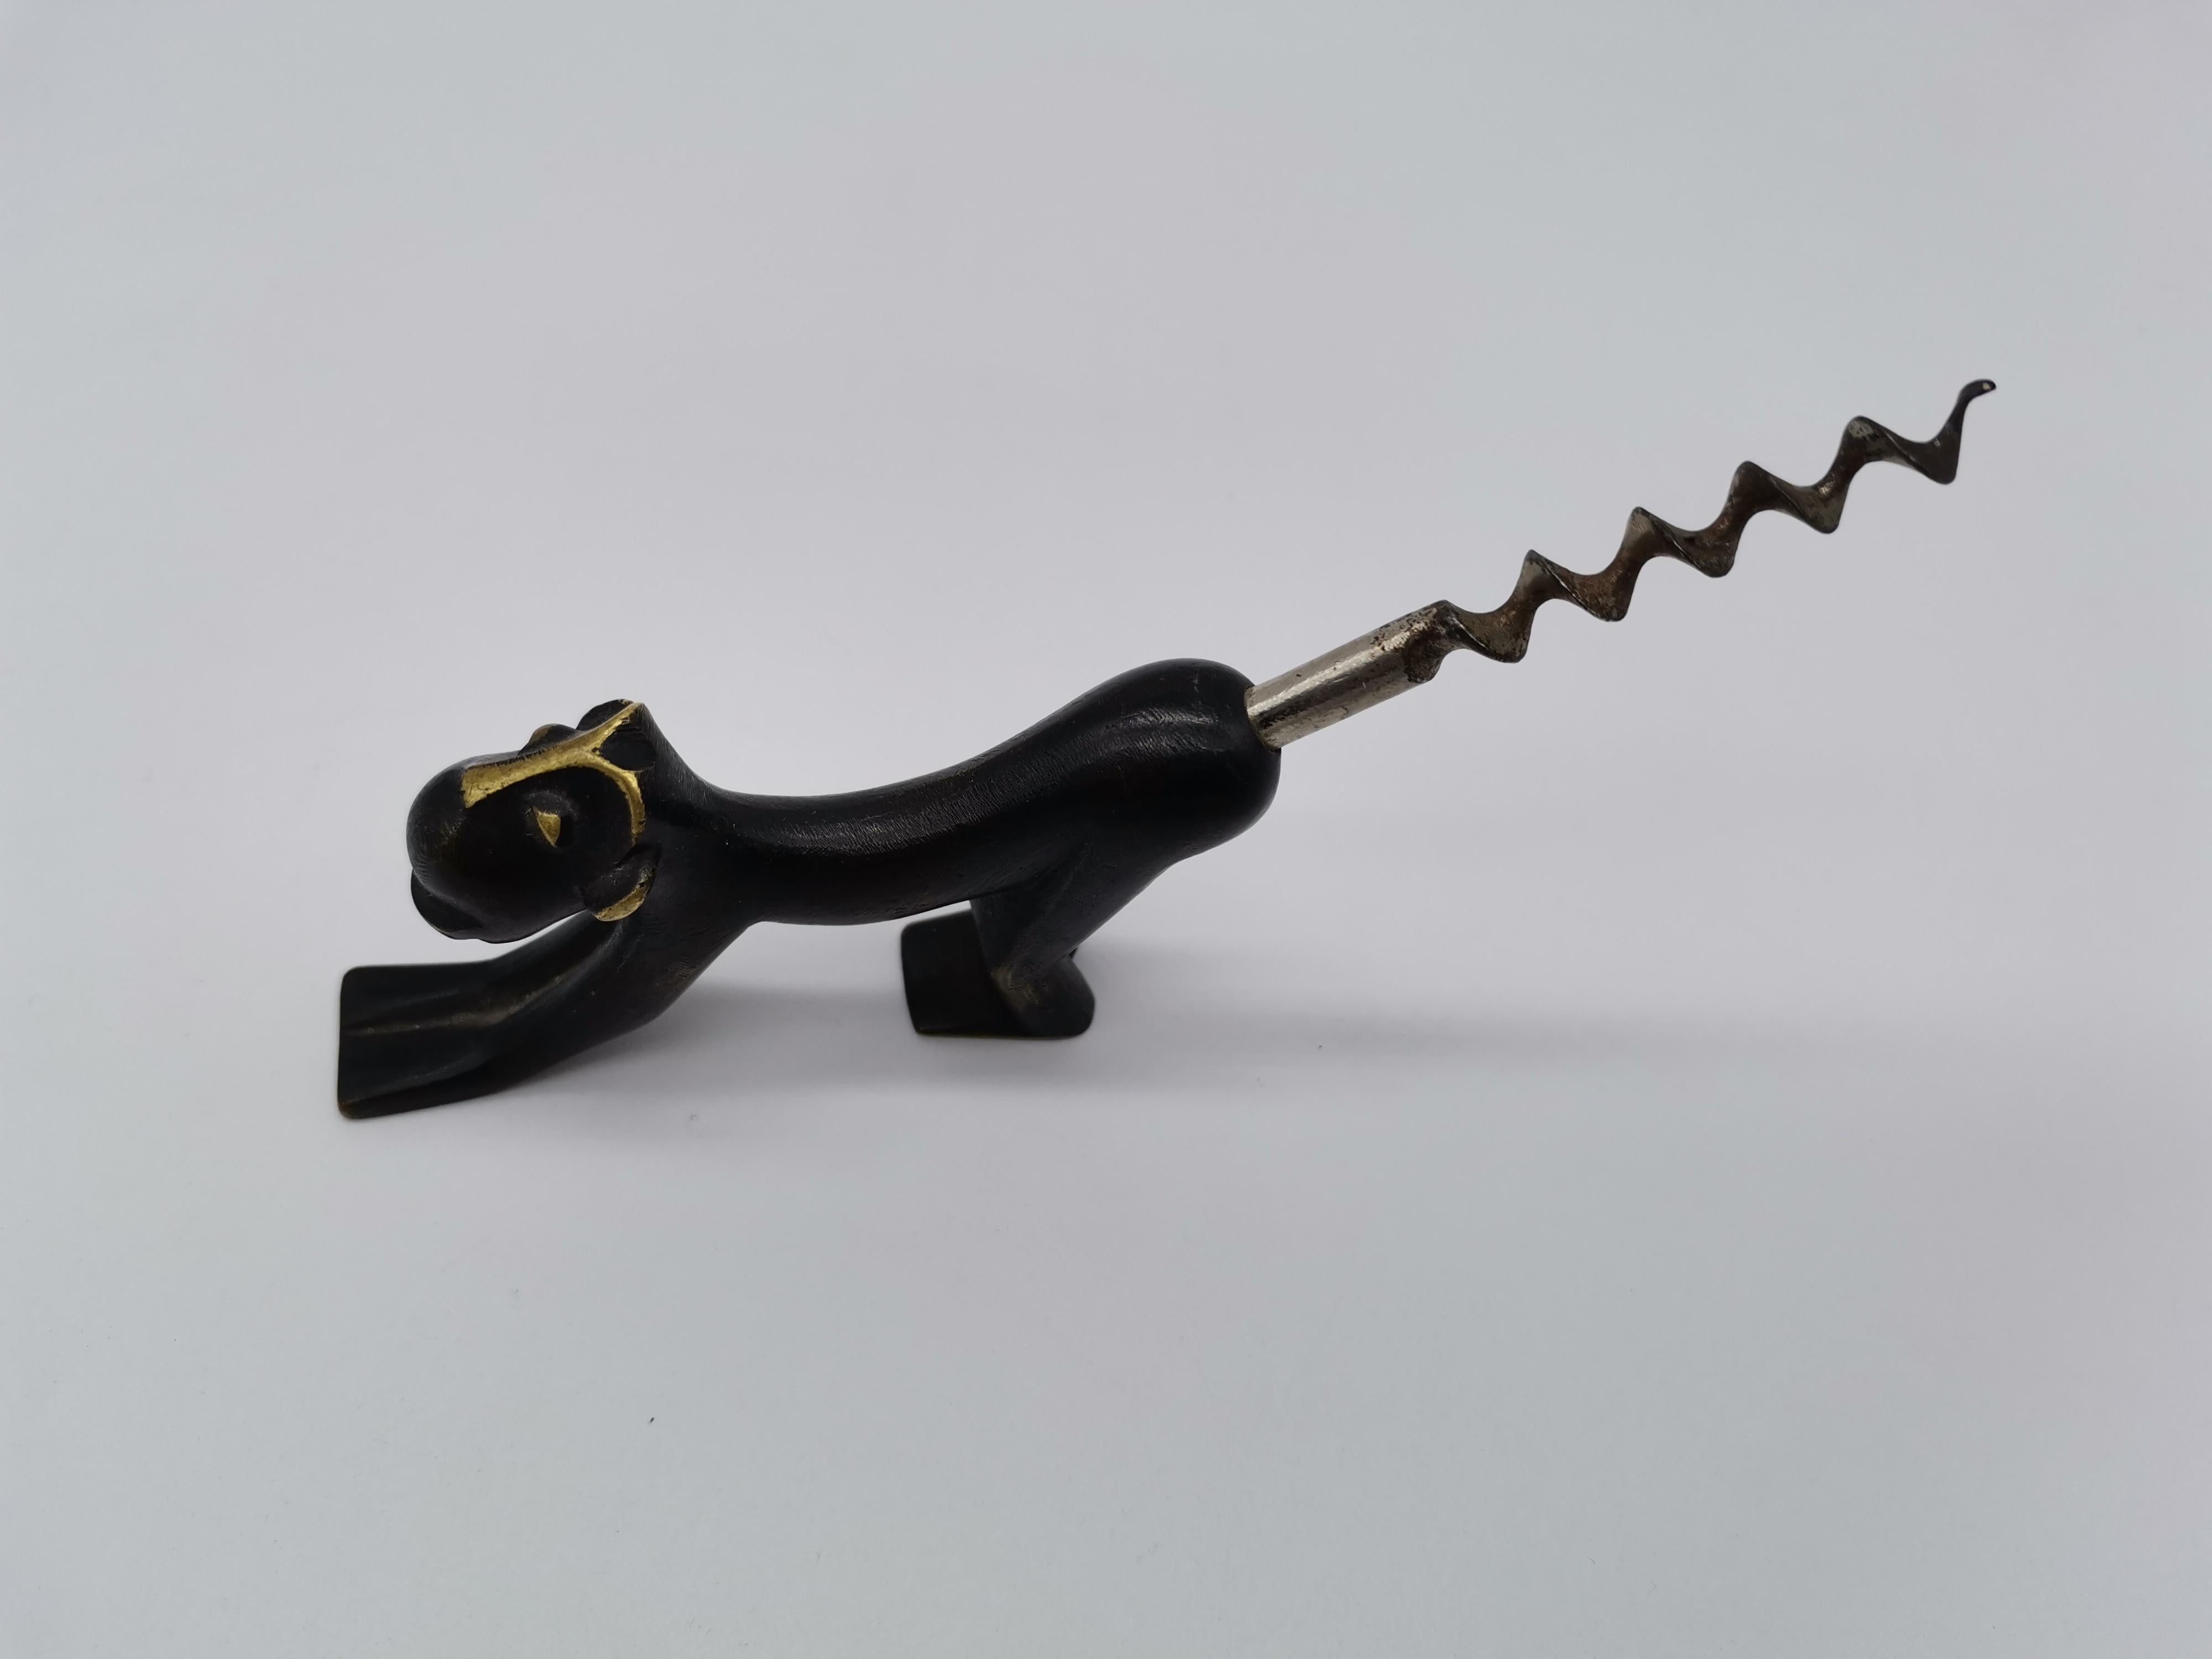 A partially blackened cork screw by Richard Rohac in the shape of an ape.